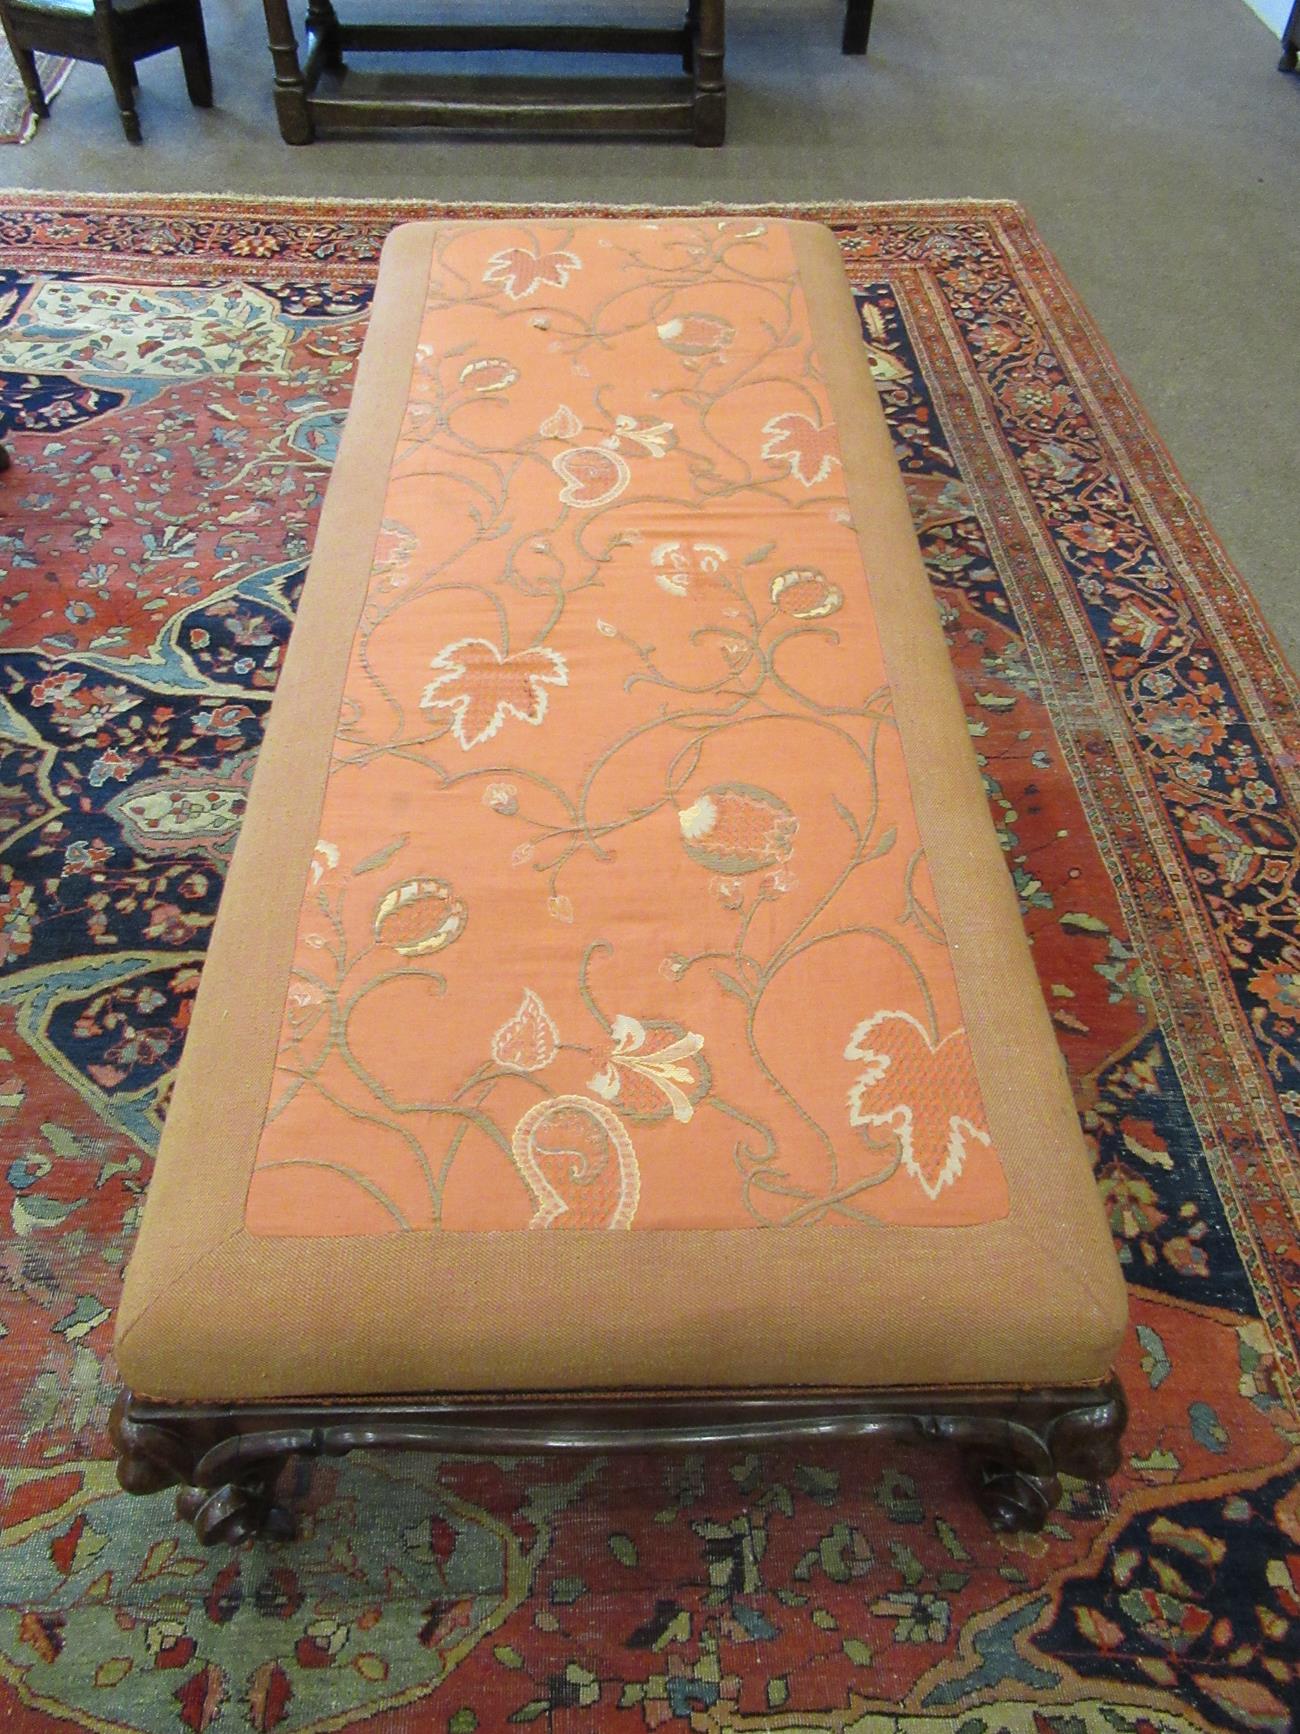 A Victorian Rosewood Frame Oversized Footstool, mid 19th century, recovered in modern crewelwork - Image 2 of 6